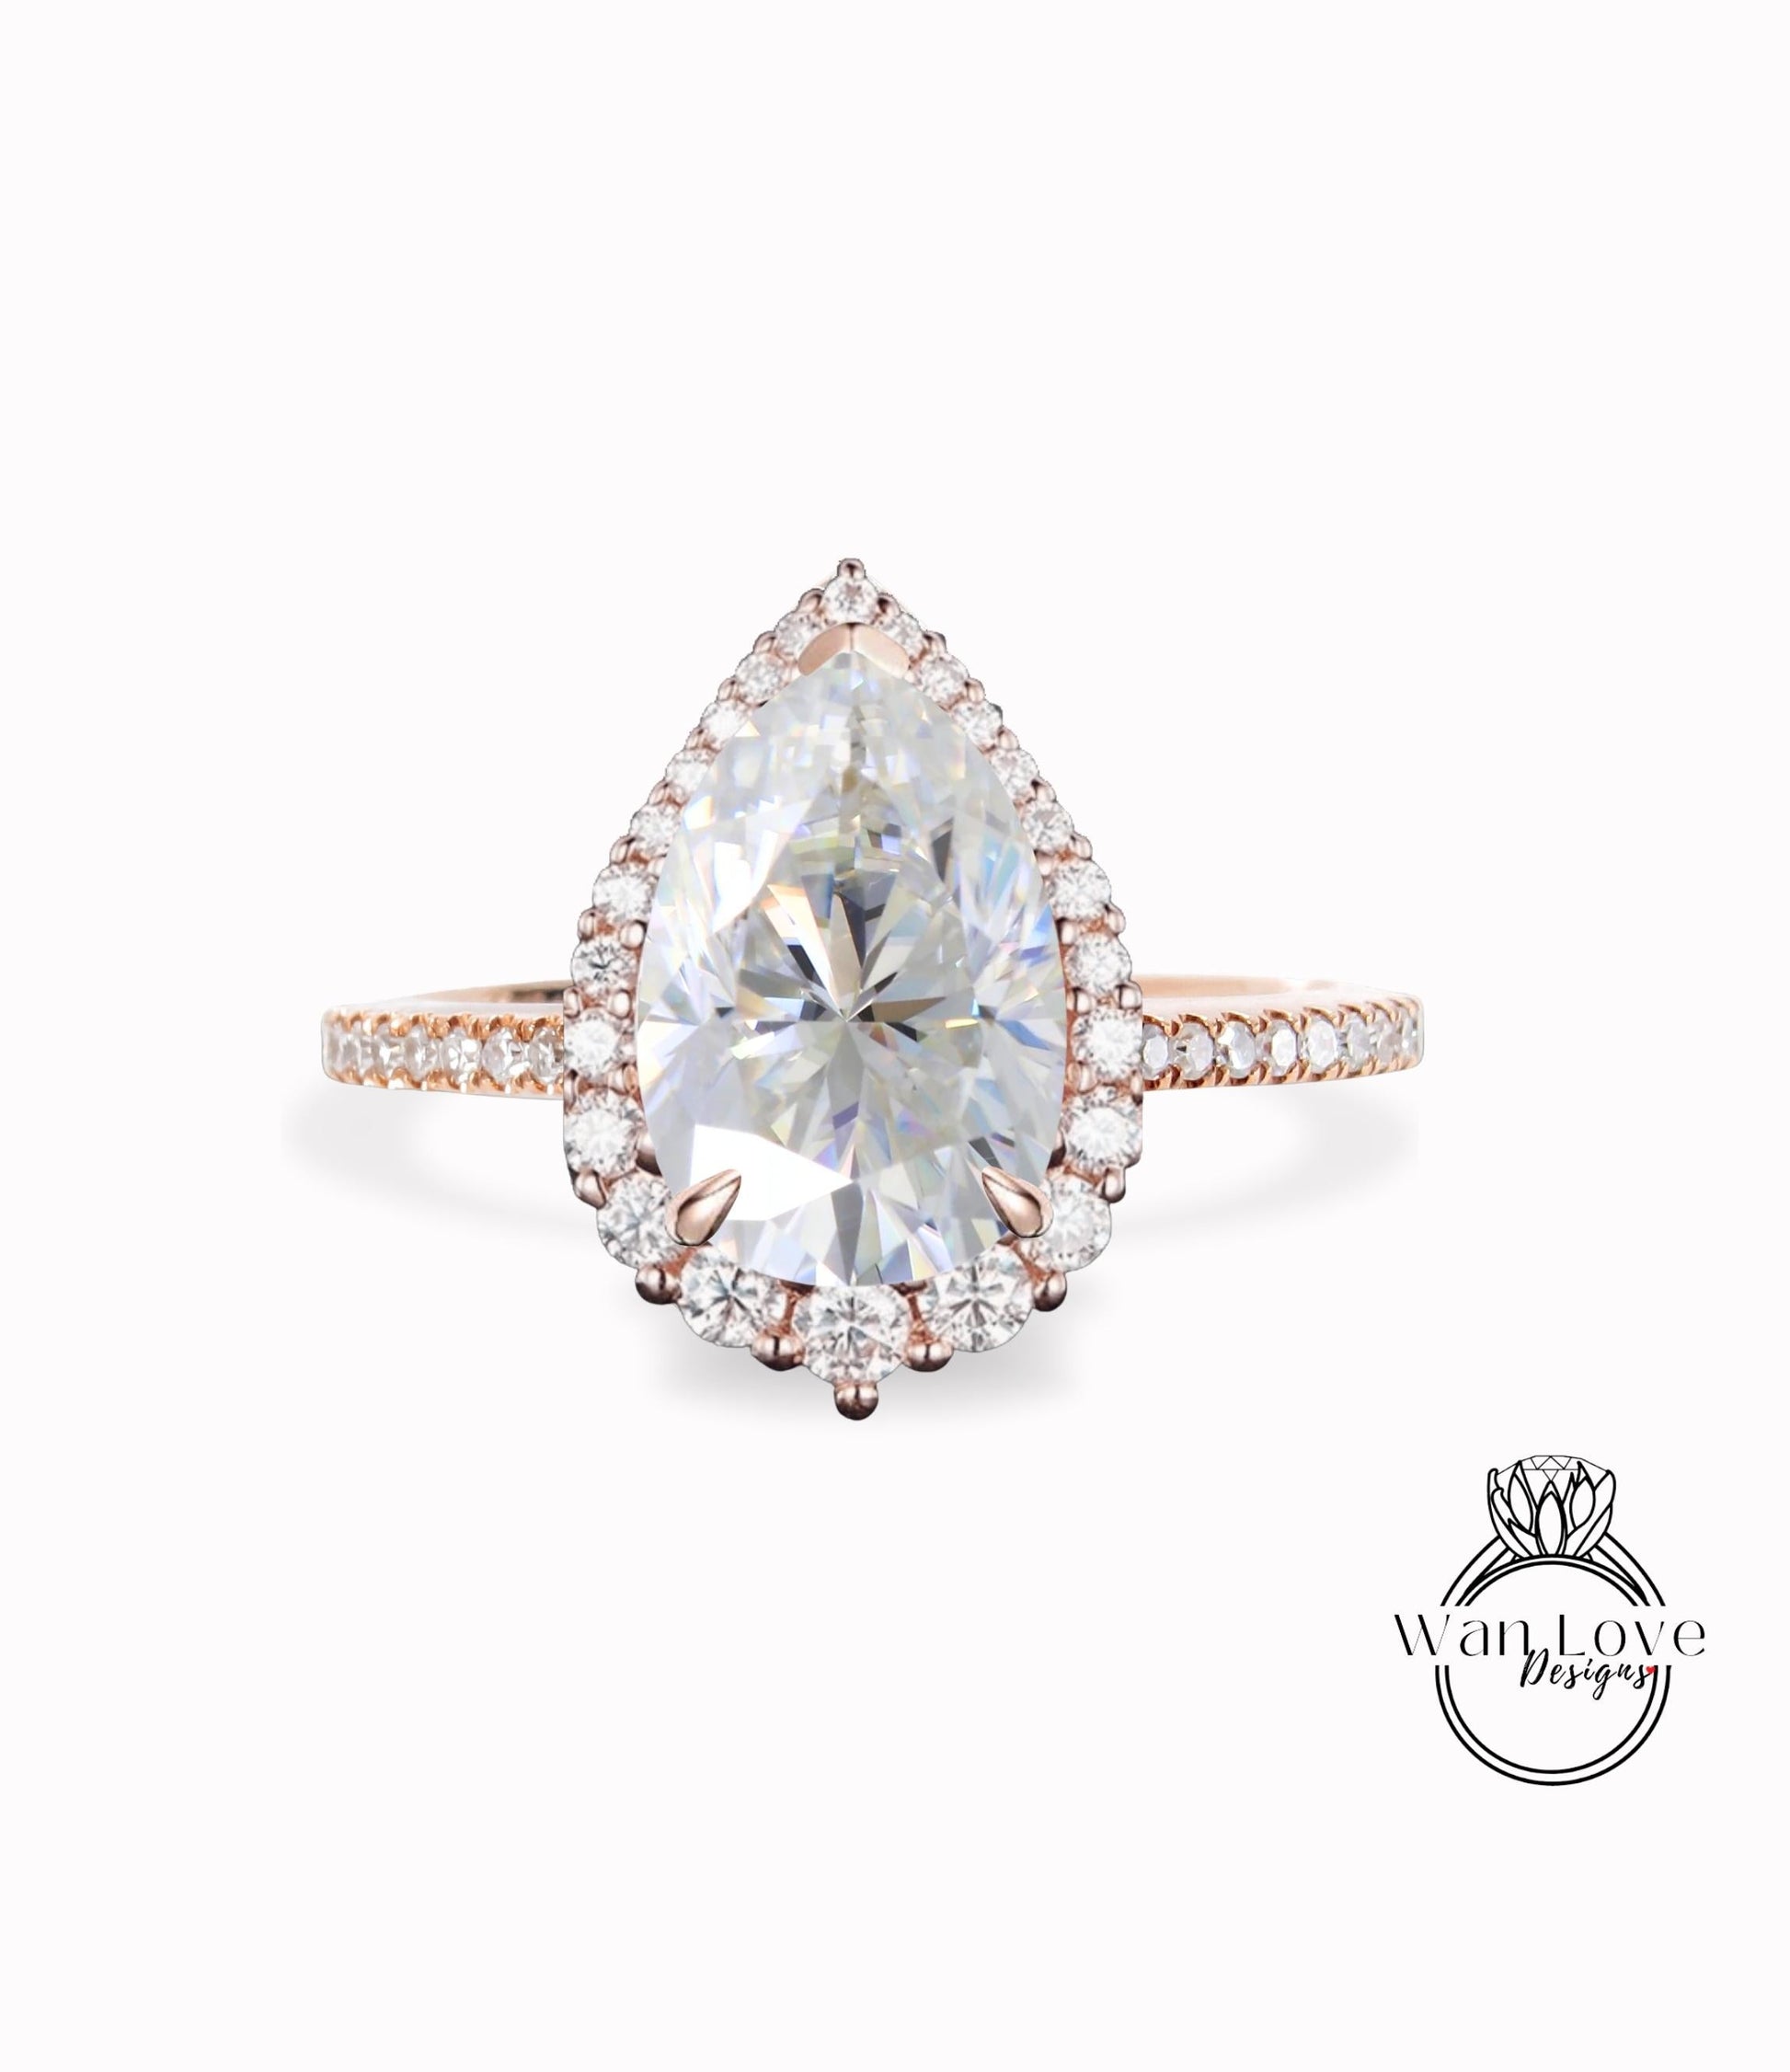 Antique Pear shaped Moissanite engagement ring vintage Art deco Unique ring white gold Diamond halo wedding promise ring Anniversary ring Wan Love Designs